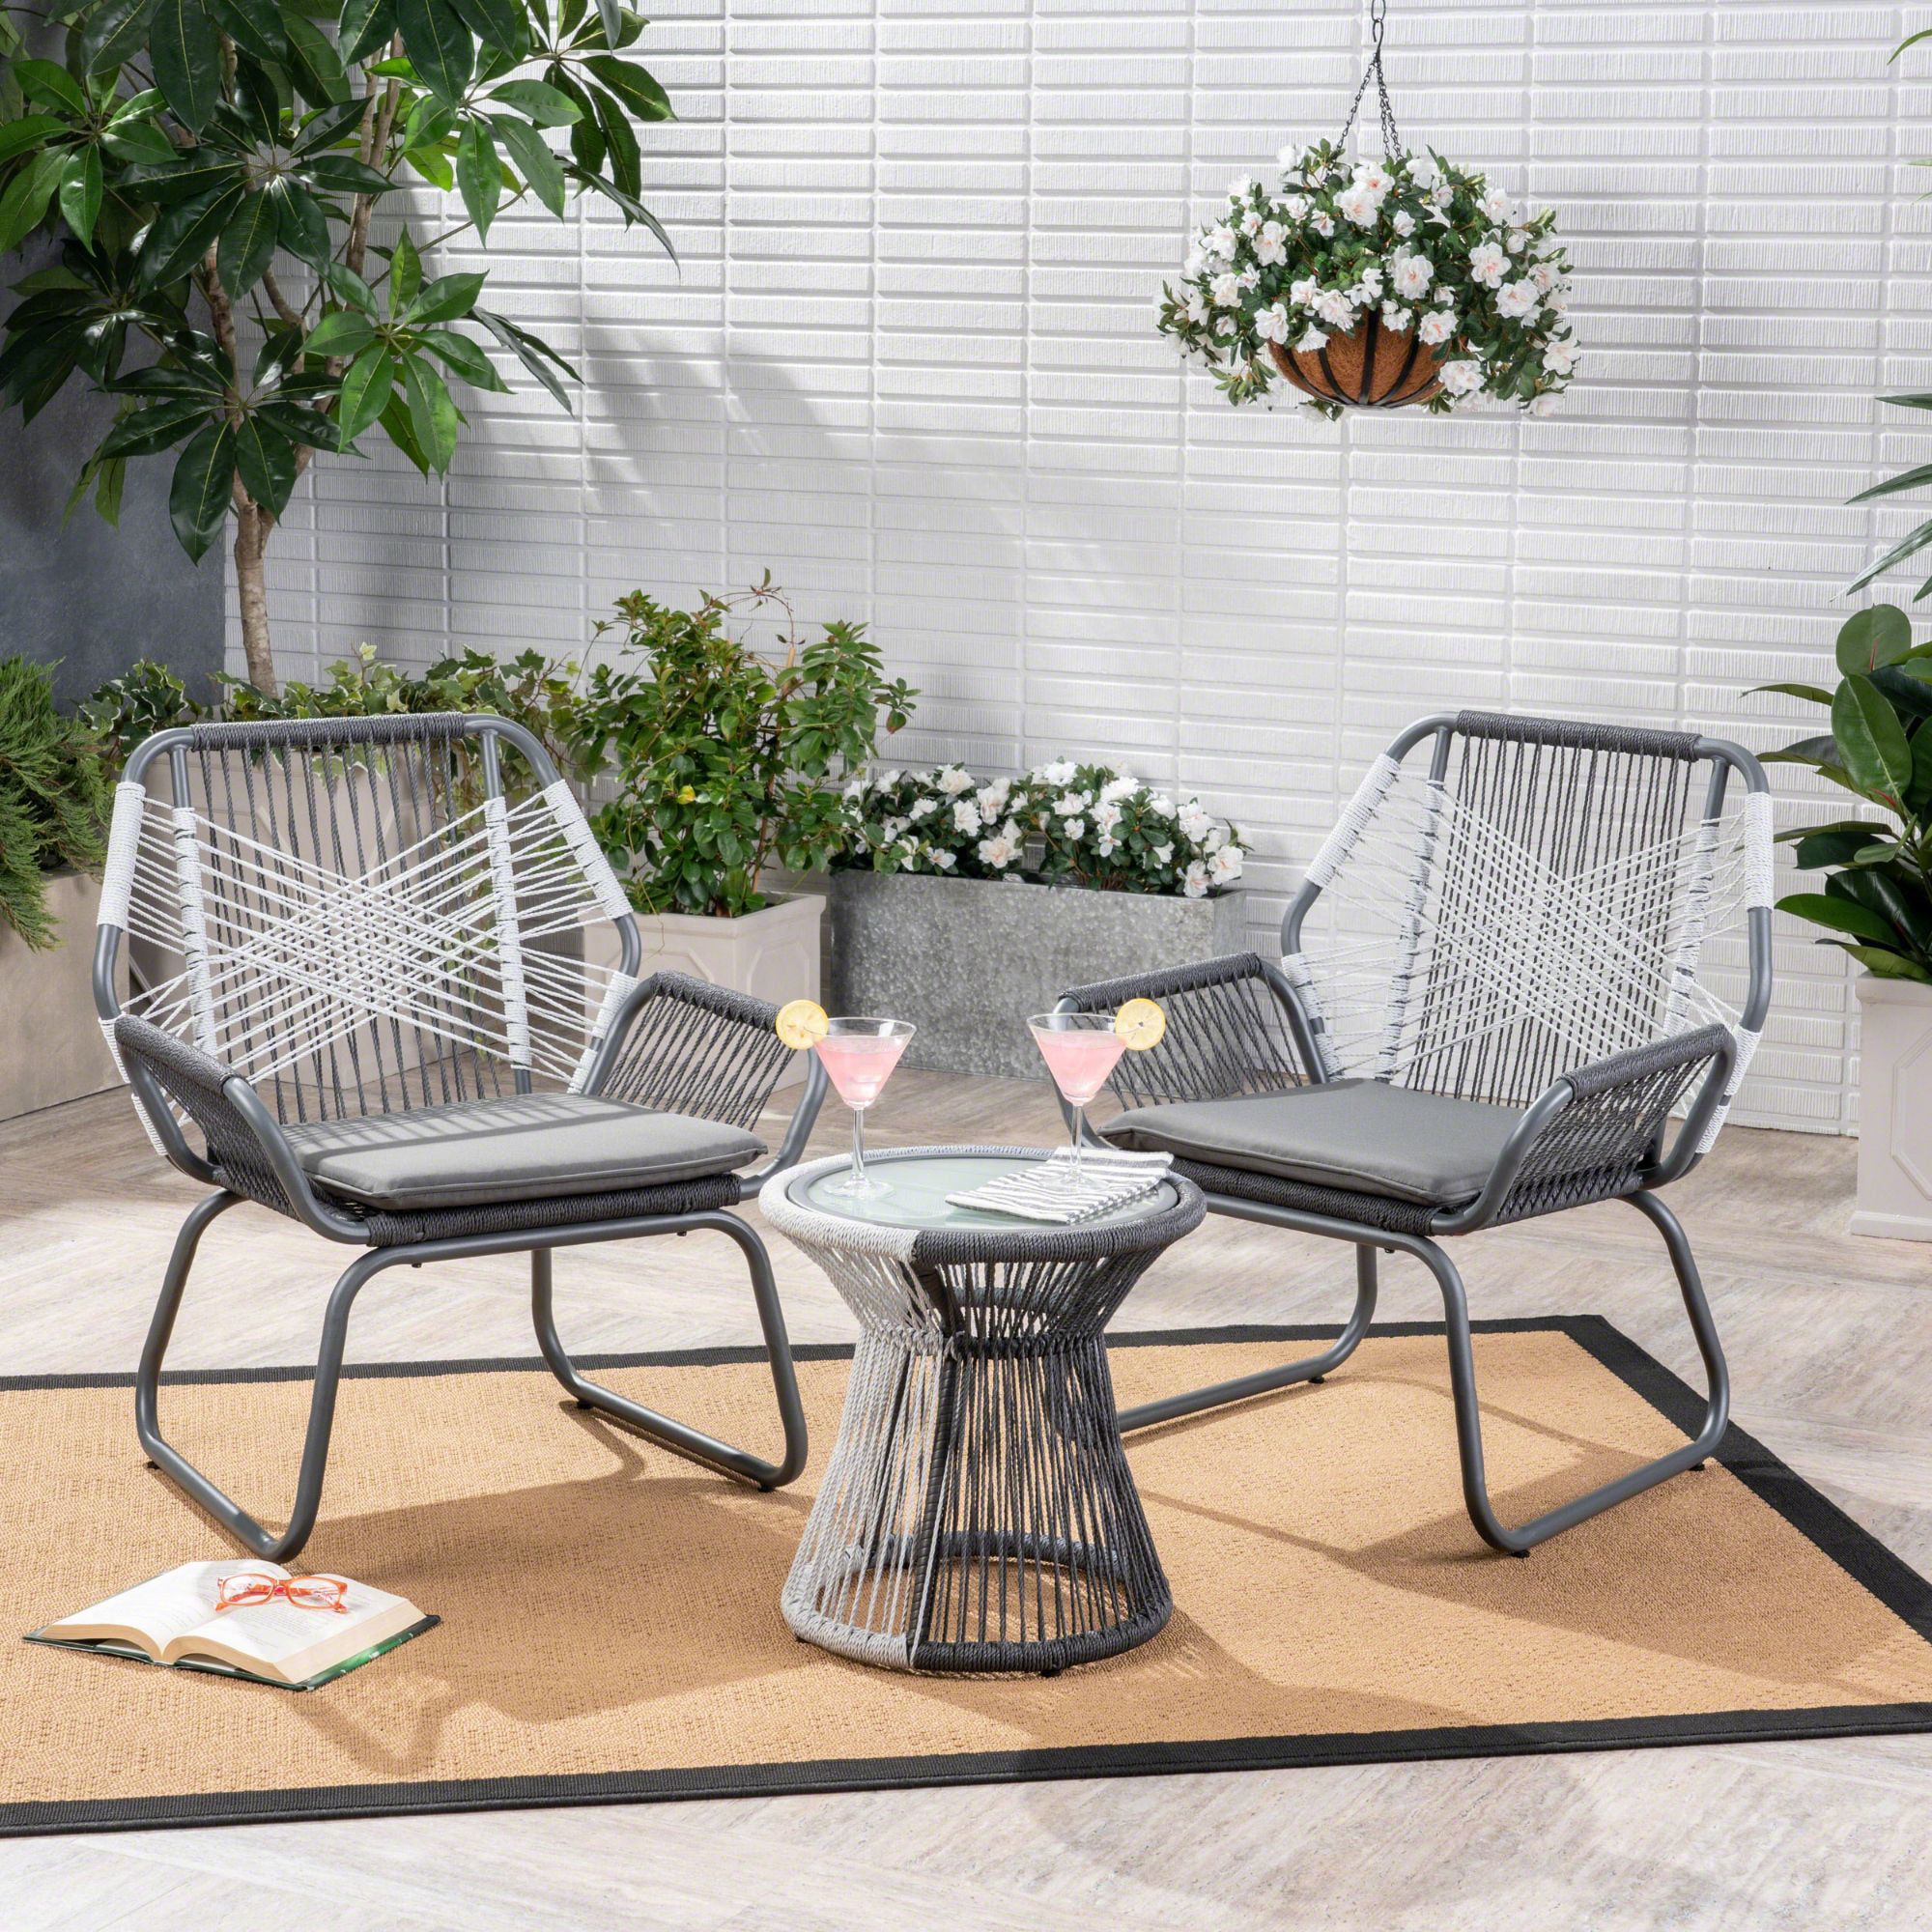 Contemporary Home Living 3 Piece Gray And White Rope Woven Outdoor  Furniture Patio Chat Set – Gray – Walmart Intended For Woven Rope Outdoor 3 Piece Conversation Set (View 6 of 15)